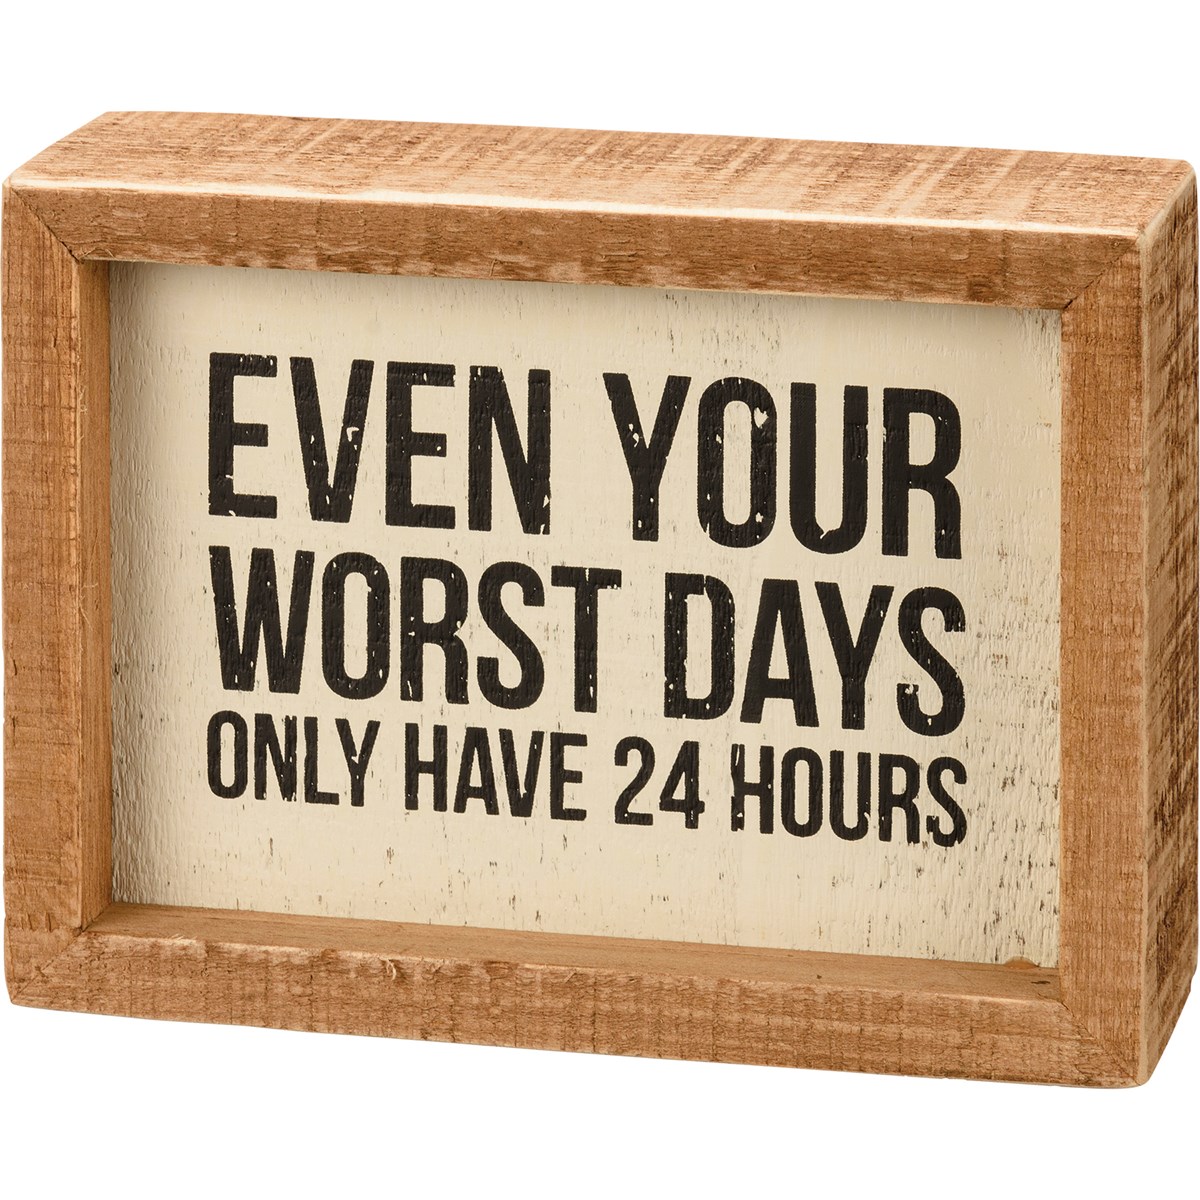 Worst Days Only Have 24 Hours Inset Box Sign - Wood